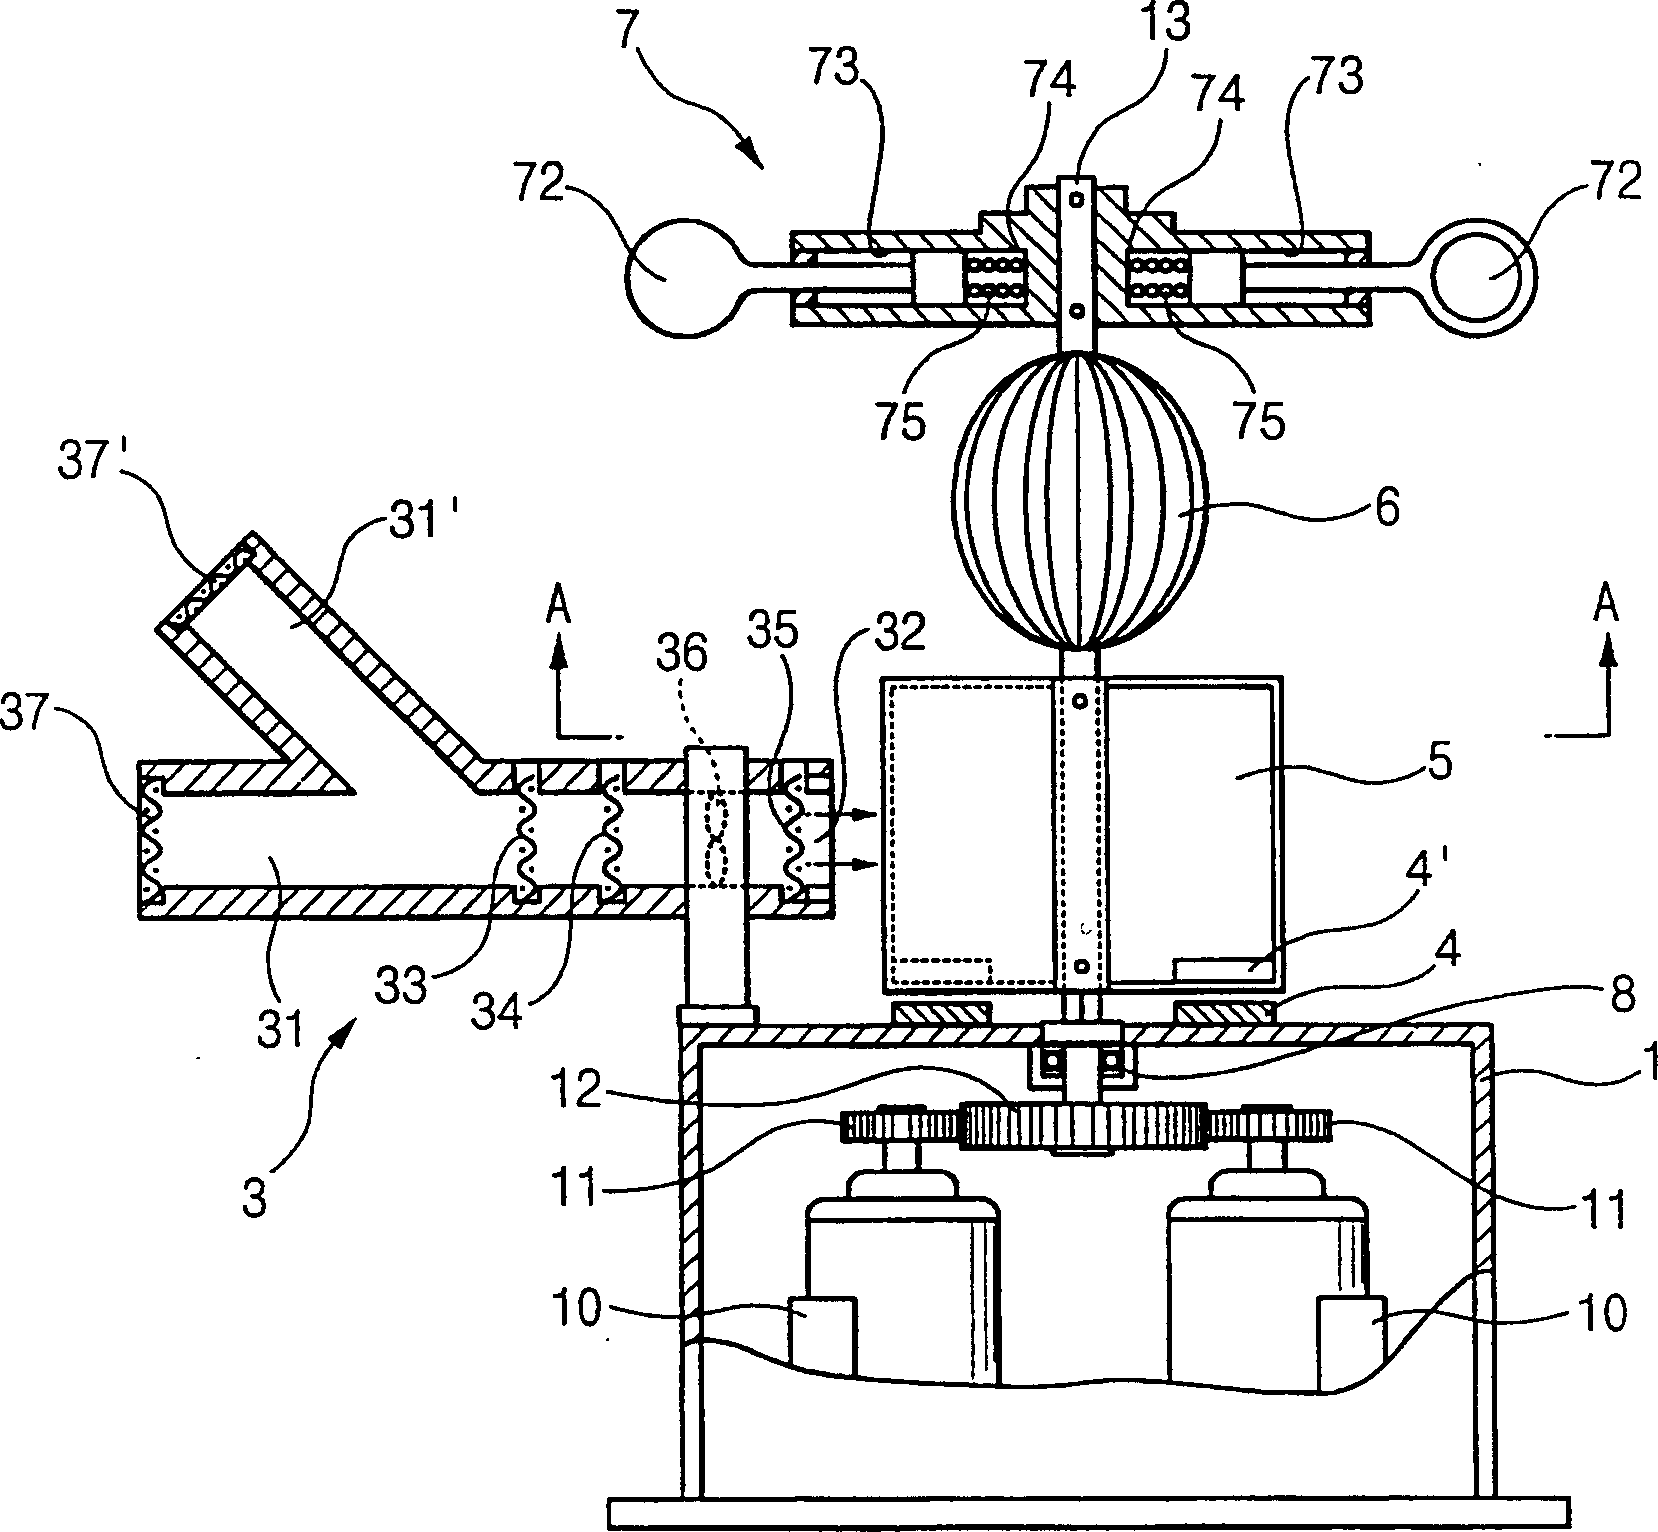 Wind power generating system used as air cheaner